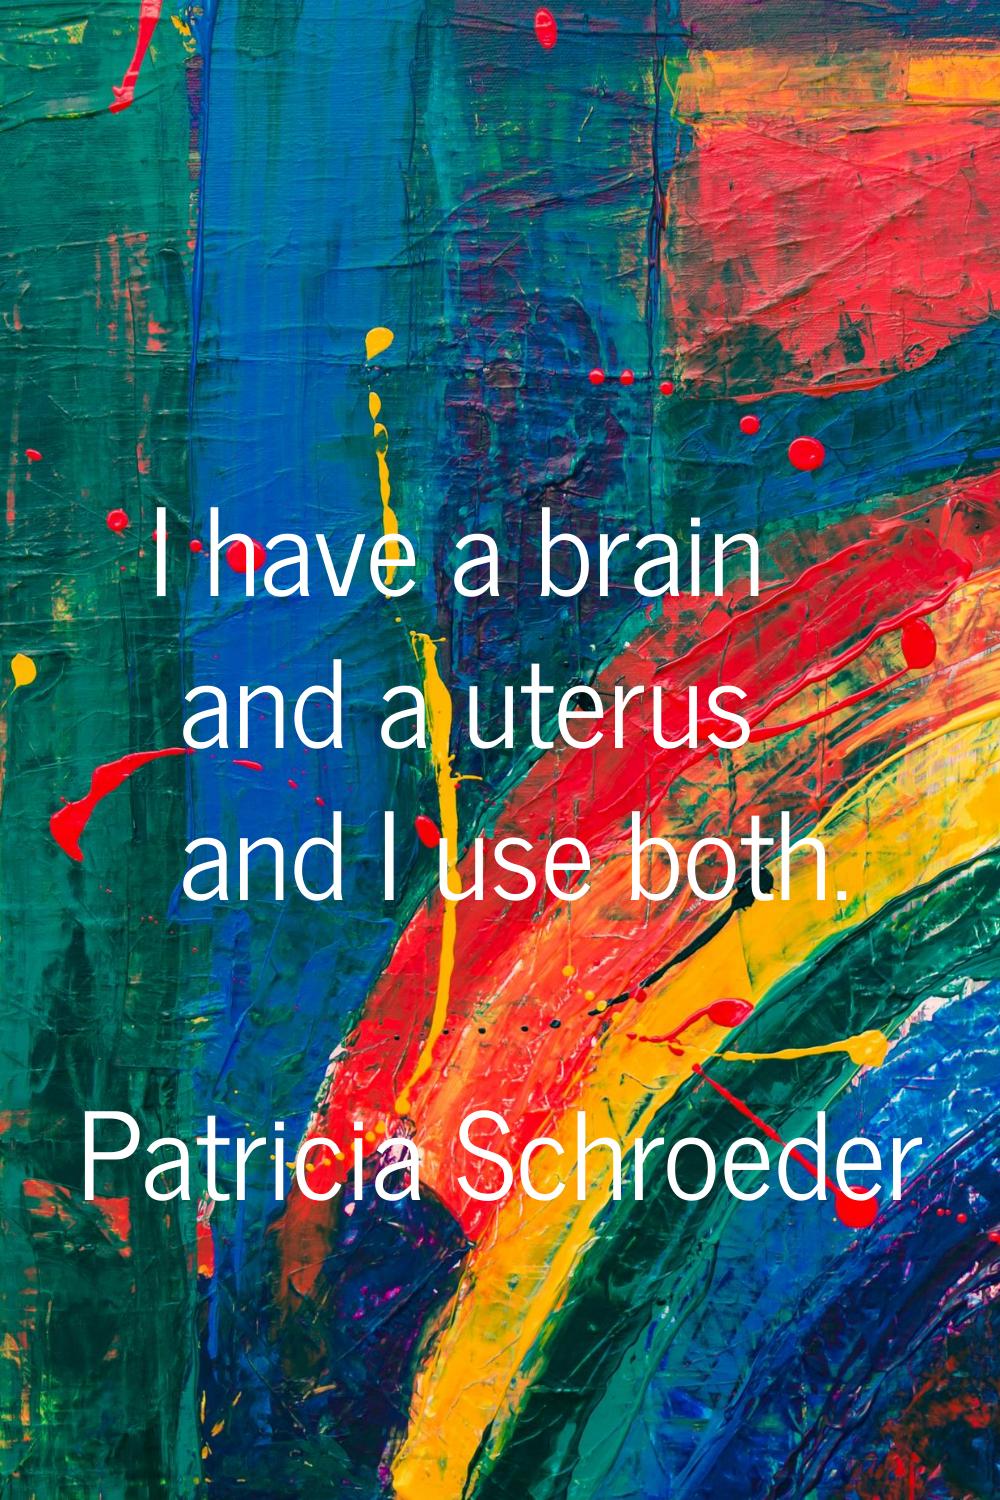 I have a brain and a uterus and I use both.